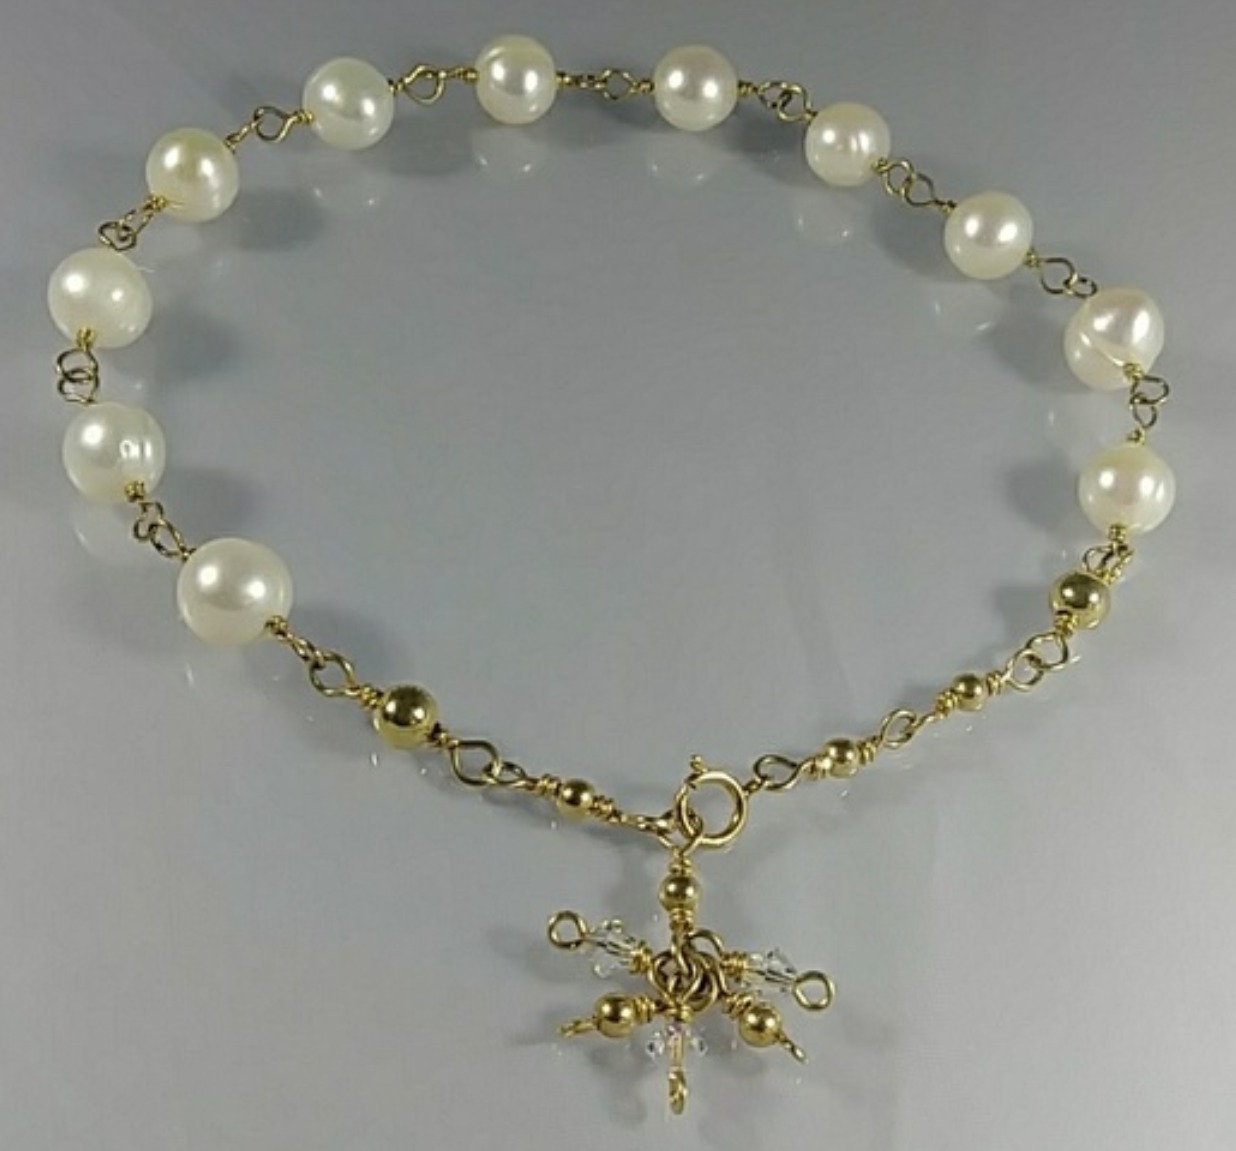 (200-BCT) - Description: Handcrafted Bracelet, Genuine Pearls, 14 KT Gold Wire, Beads and Closure, Swarovski AB Crystals  - Dimension: Adjustable up to 10 3/4 ' L (Inches)